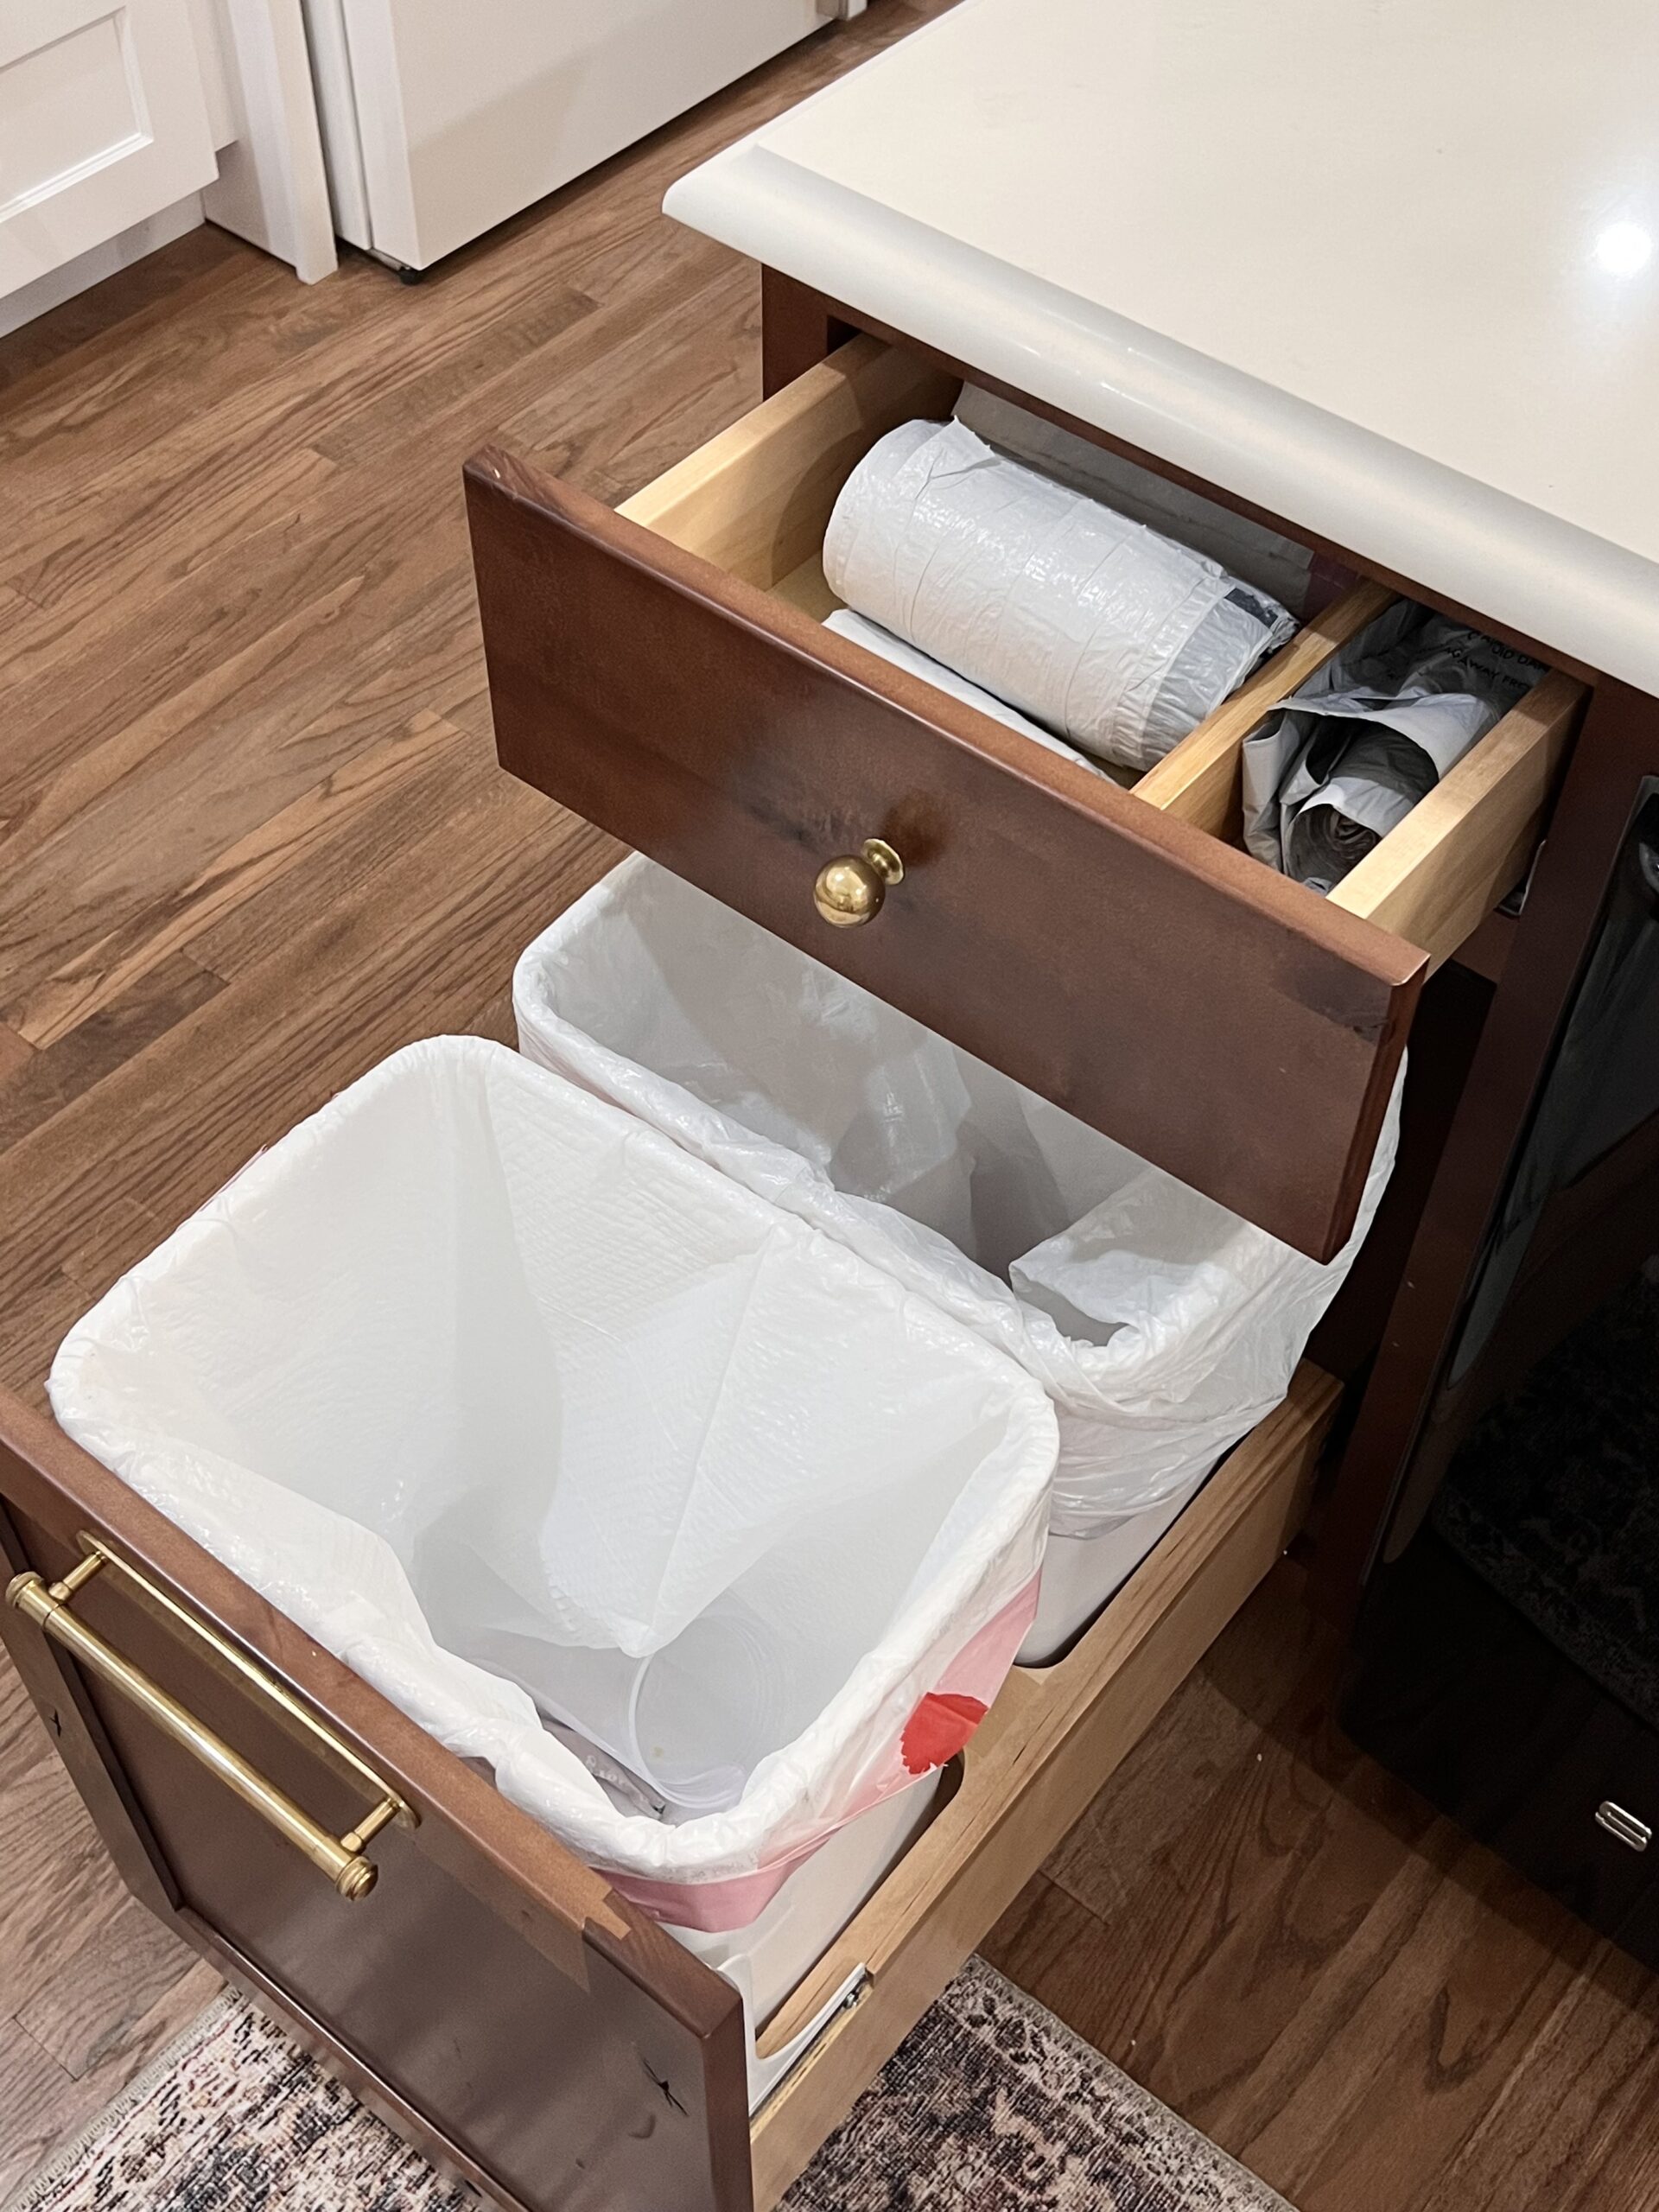 Built-In Organization for Kitchens: 6 Cabinet & Drawer Options We Recommend